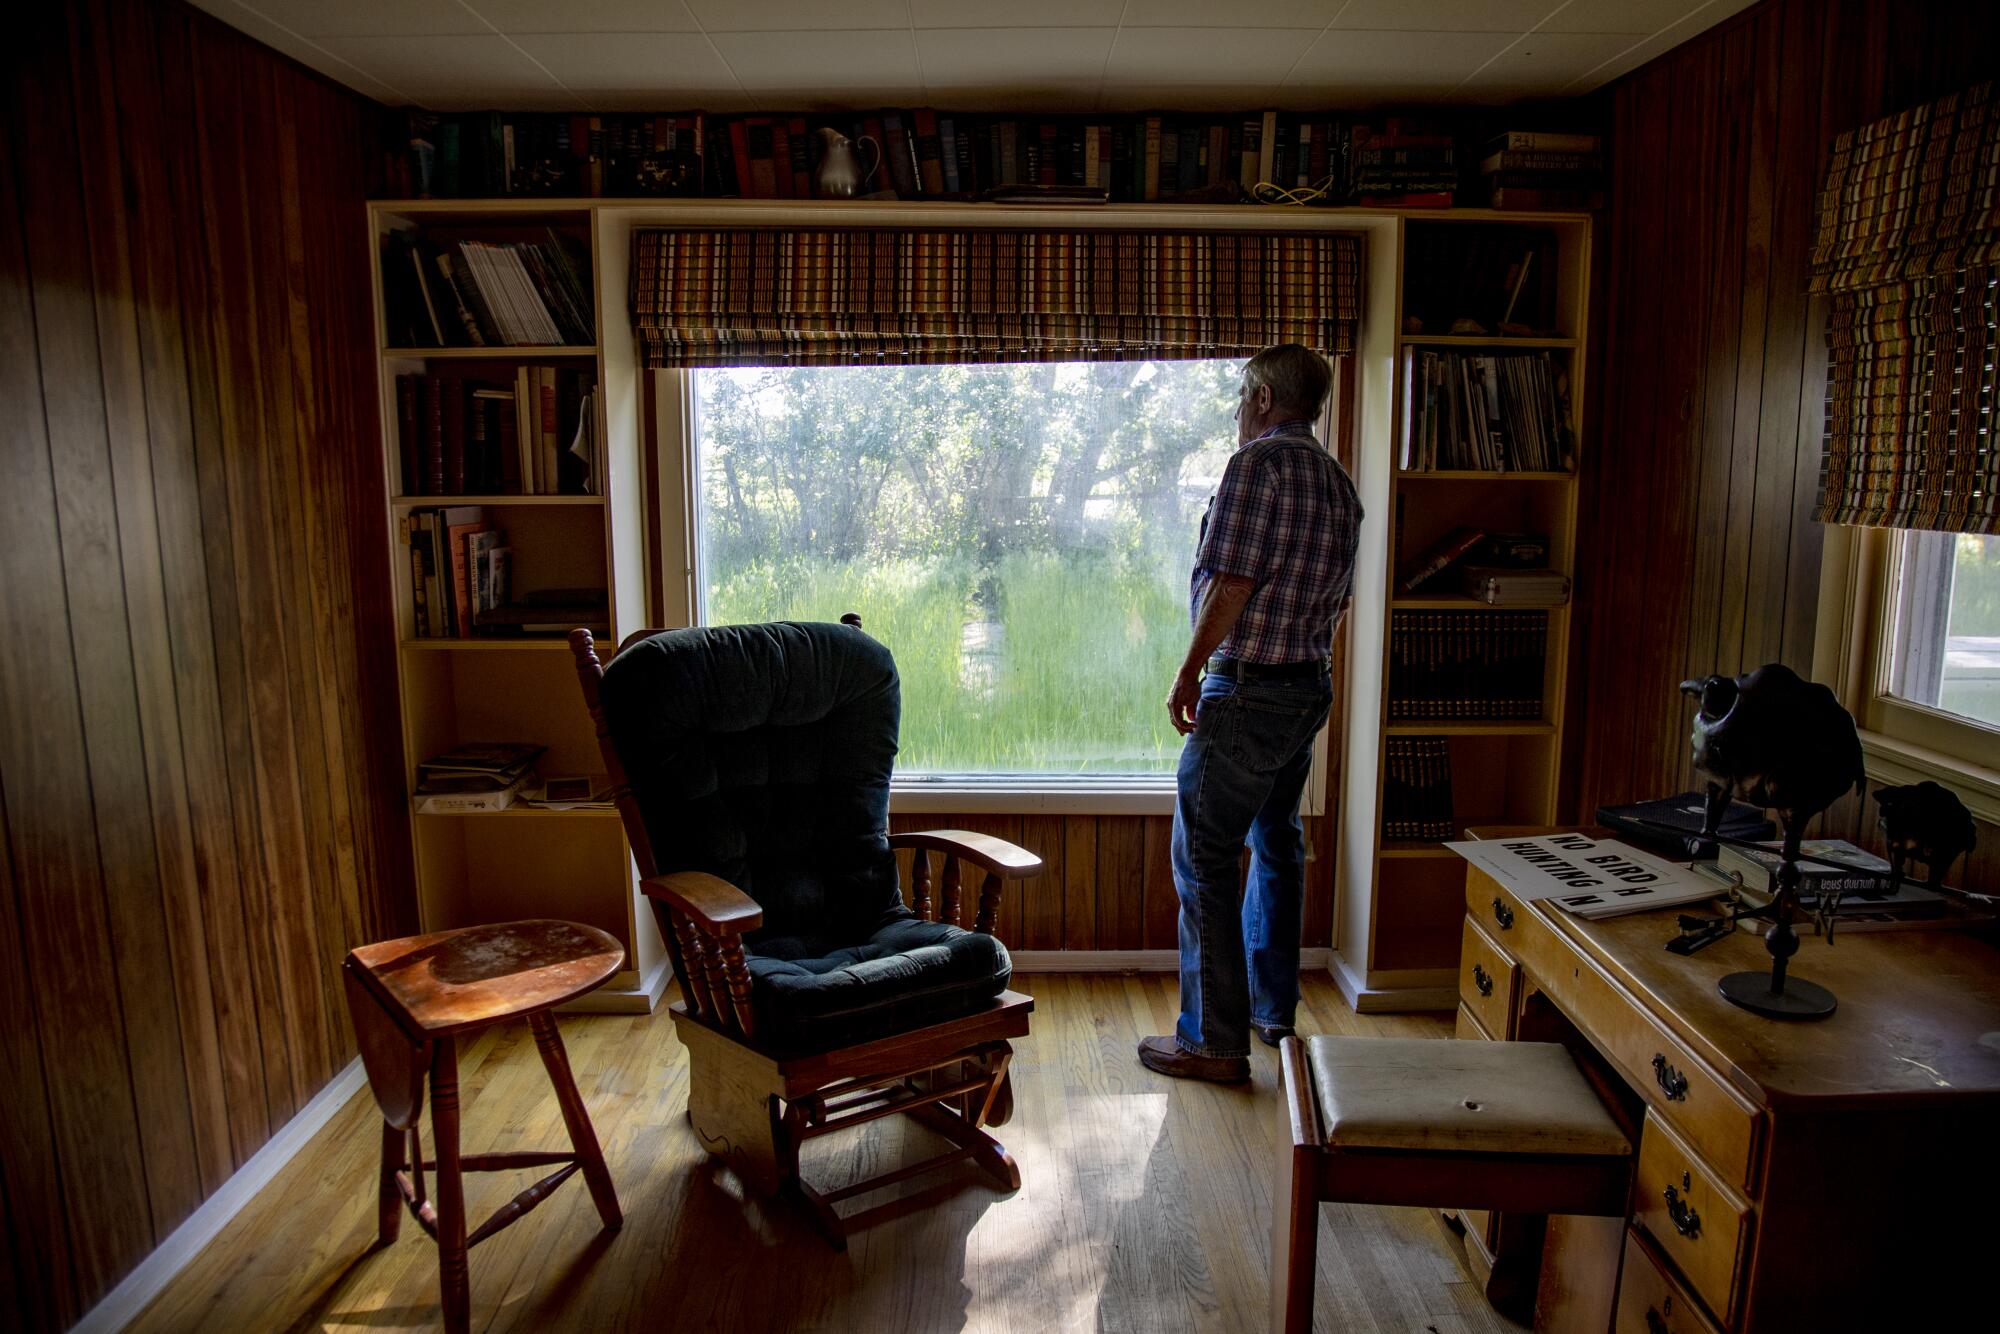 Jon Nicolaysen stares out the window of his home